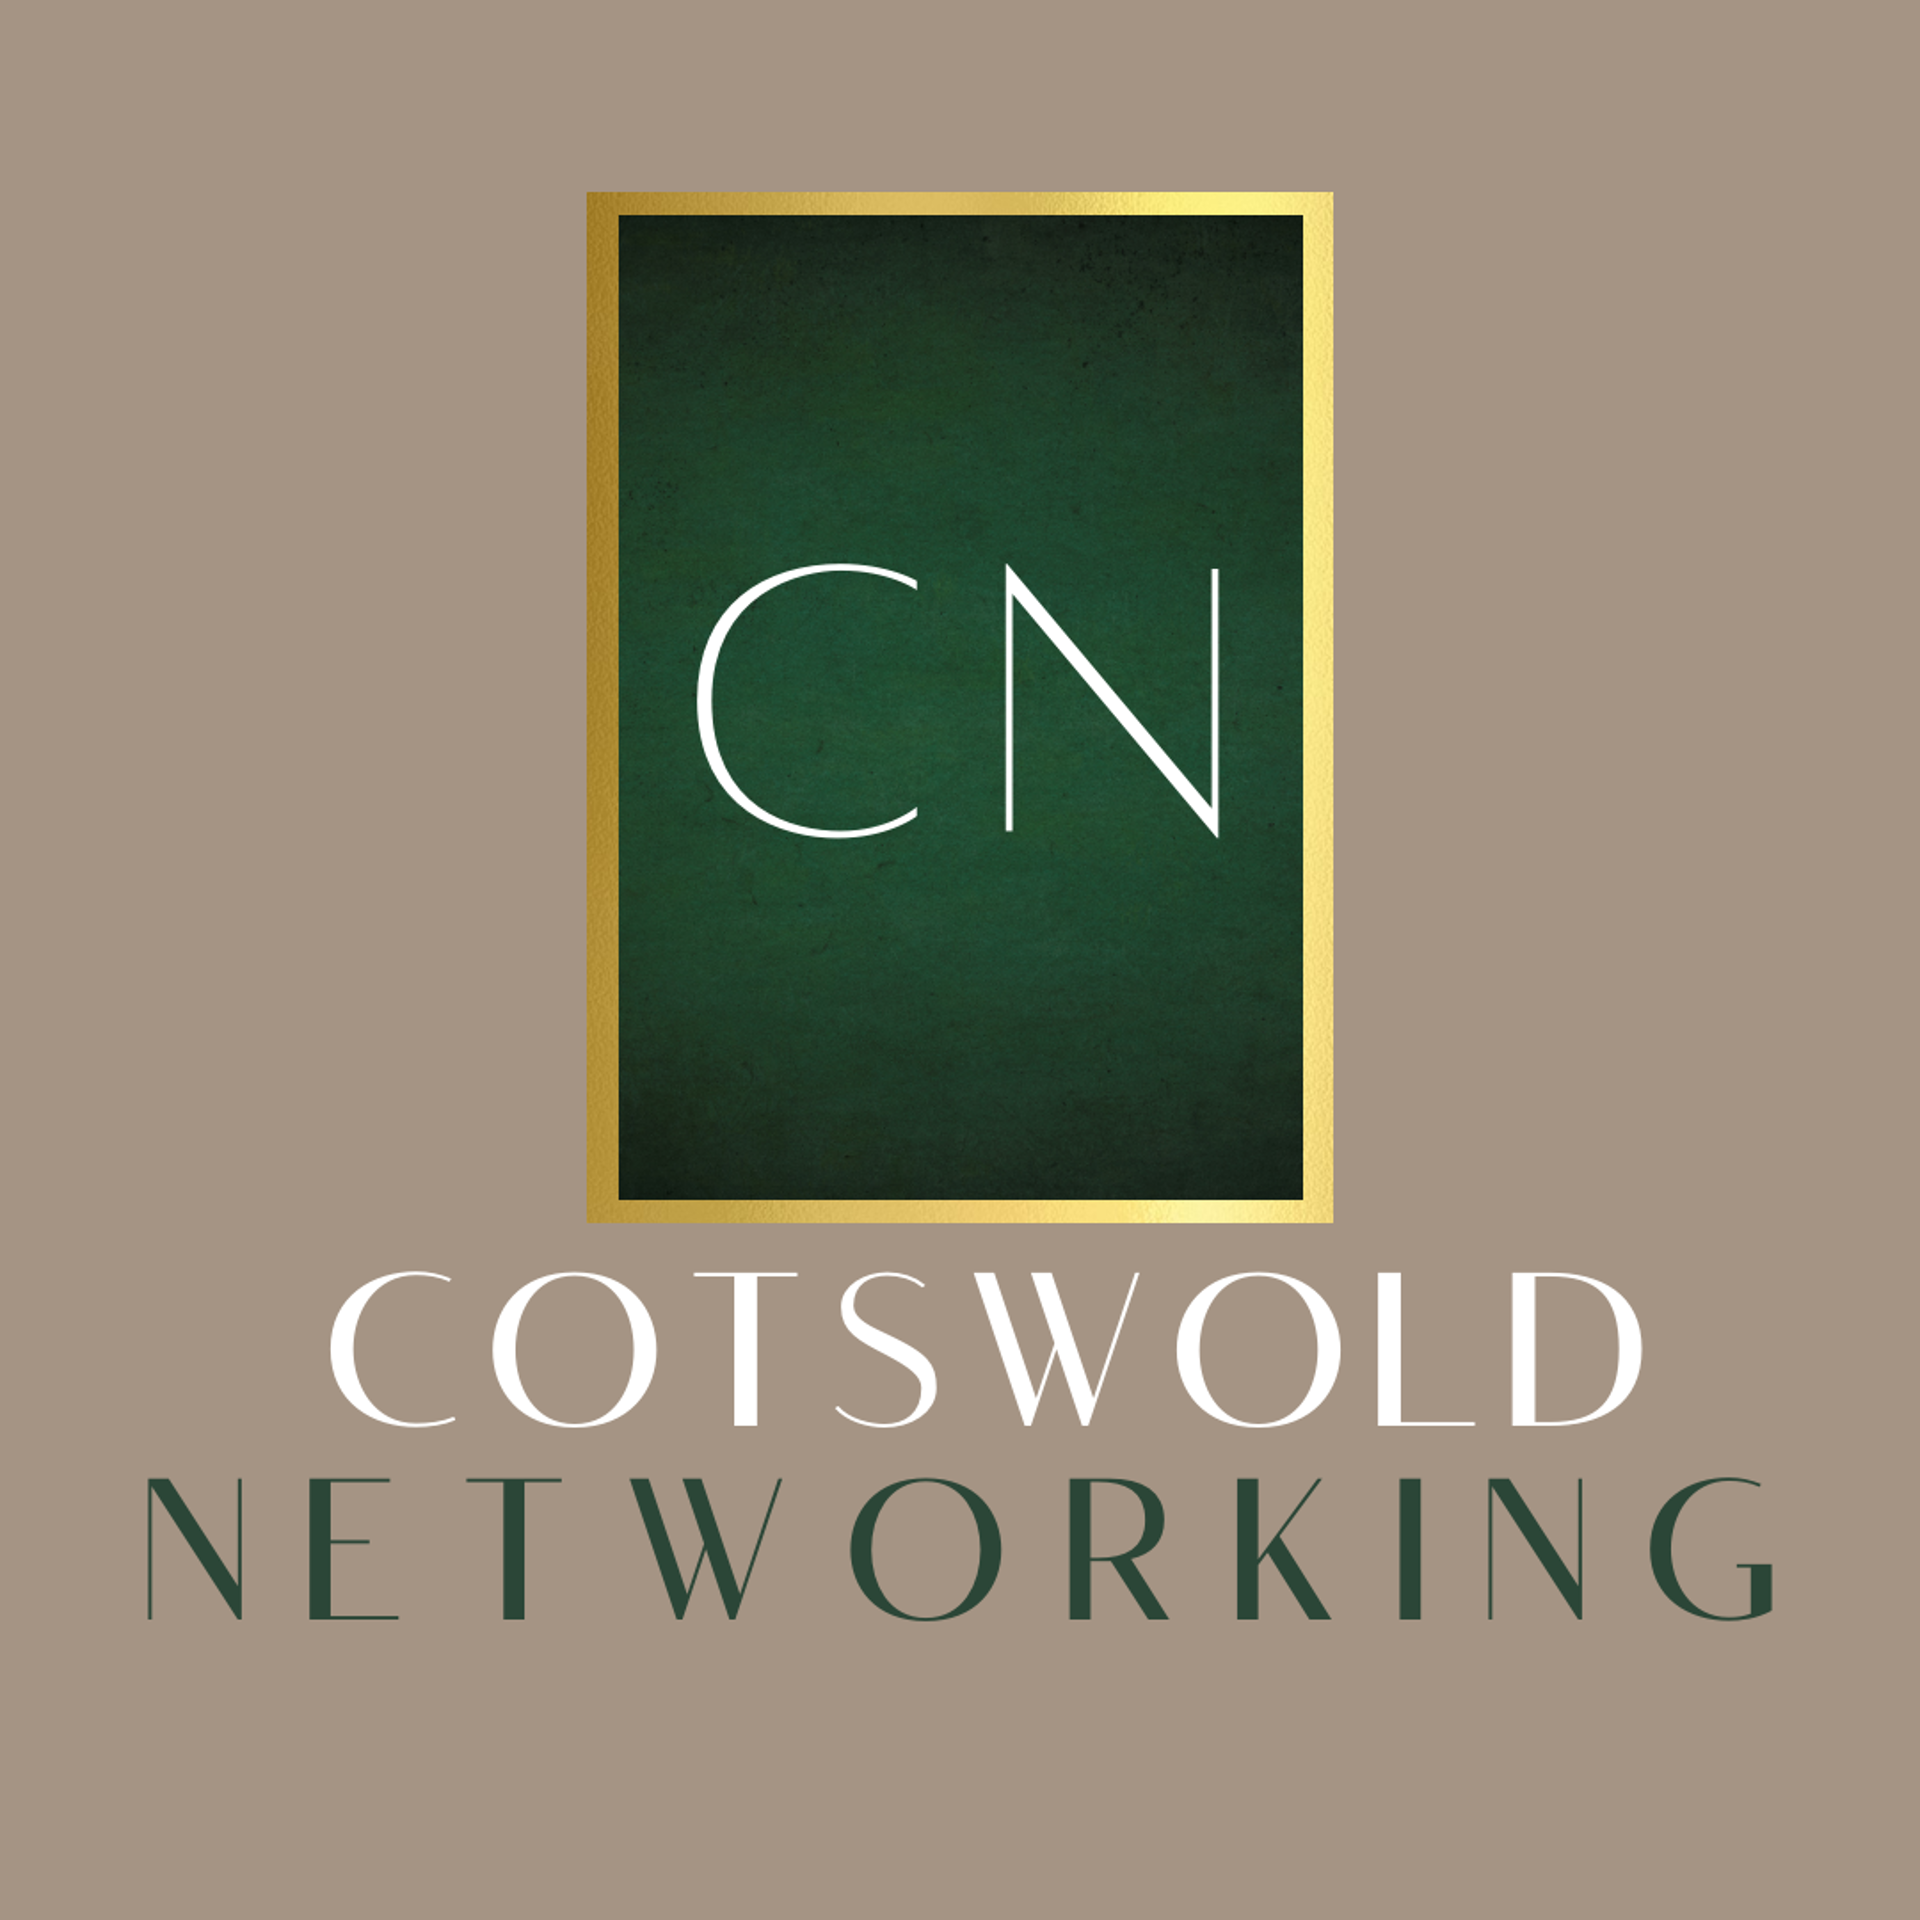 https://cotswoldnetworking.co.uk